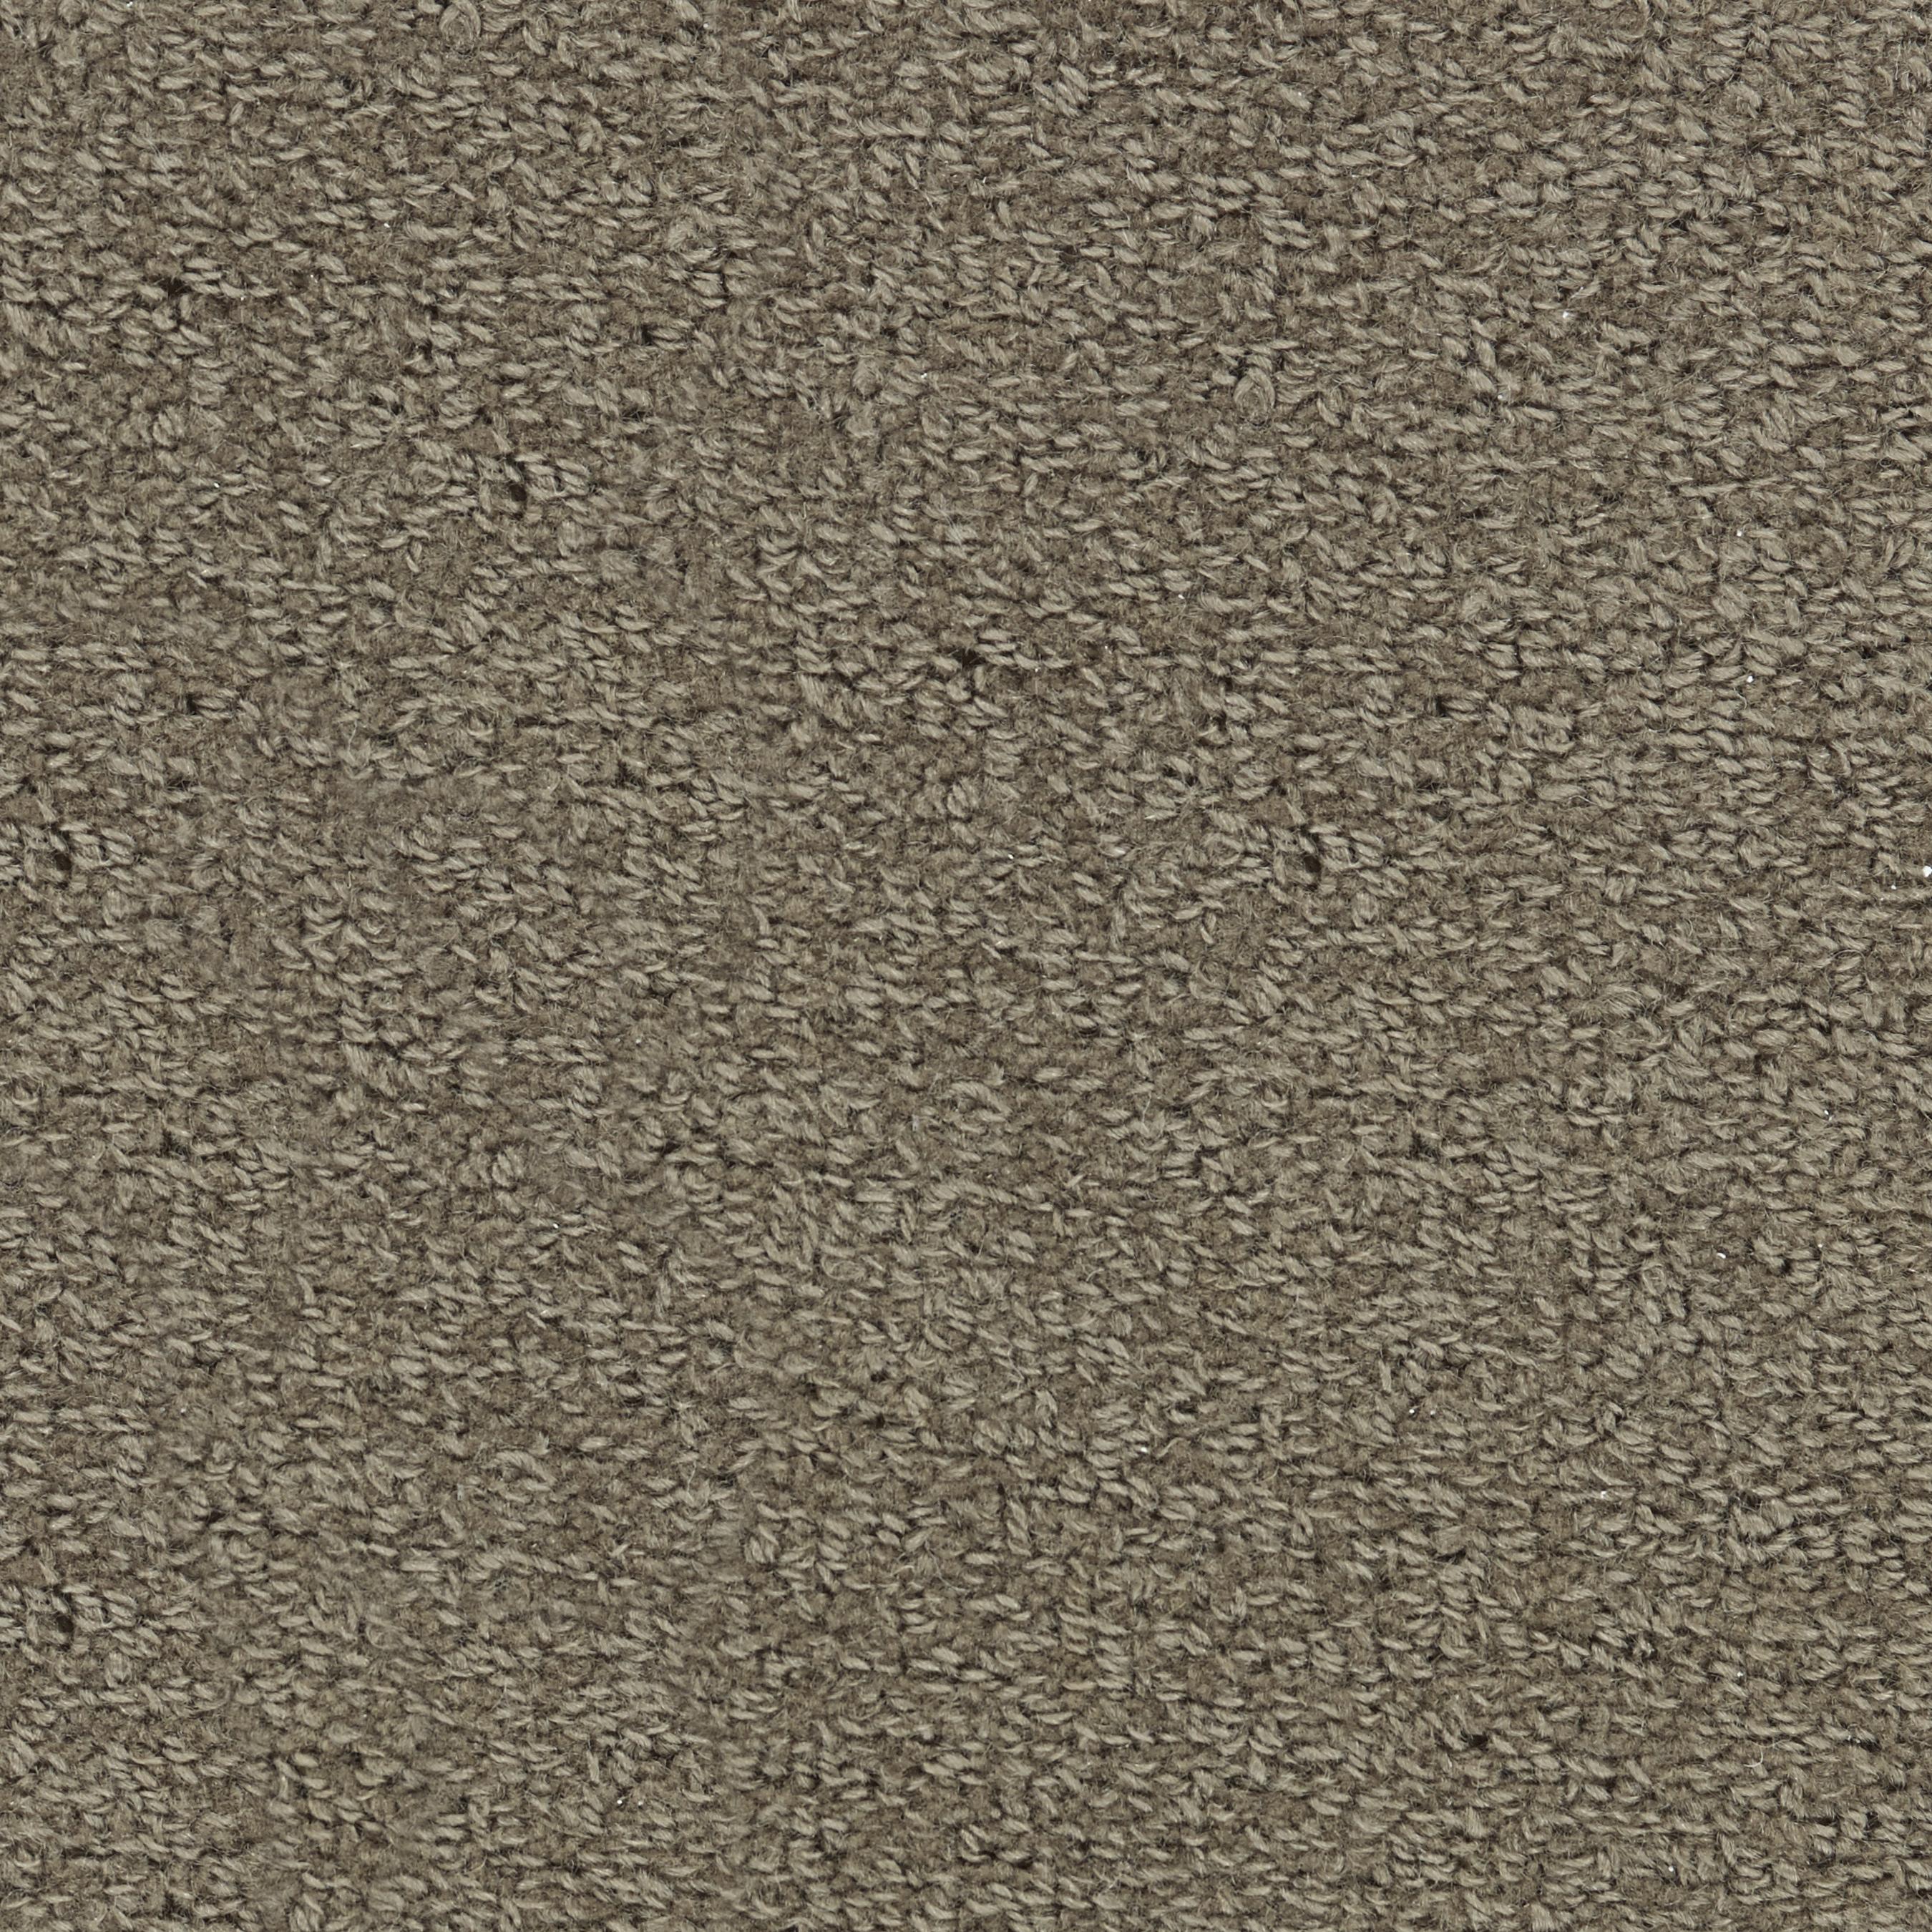 Product Image for WOOL TIP SHEAR 2 SUEDE